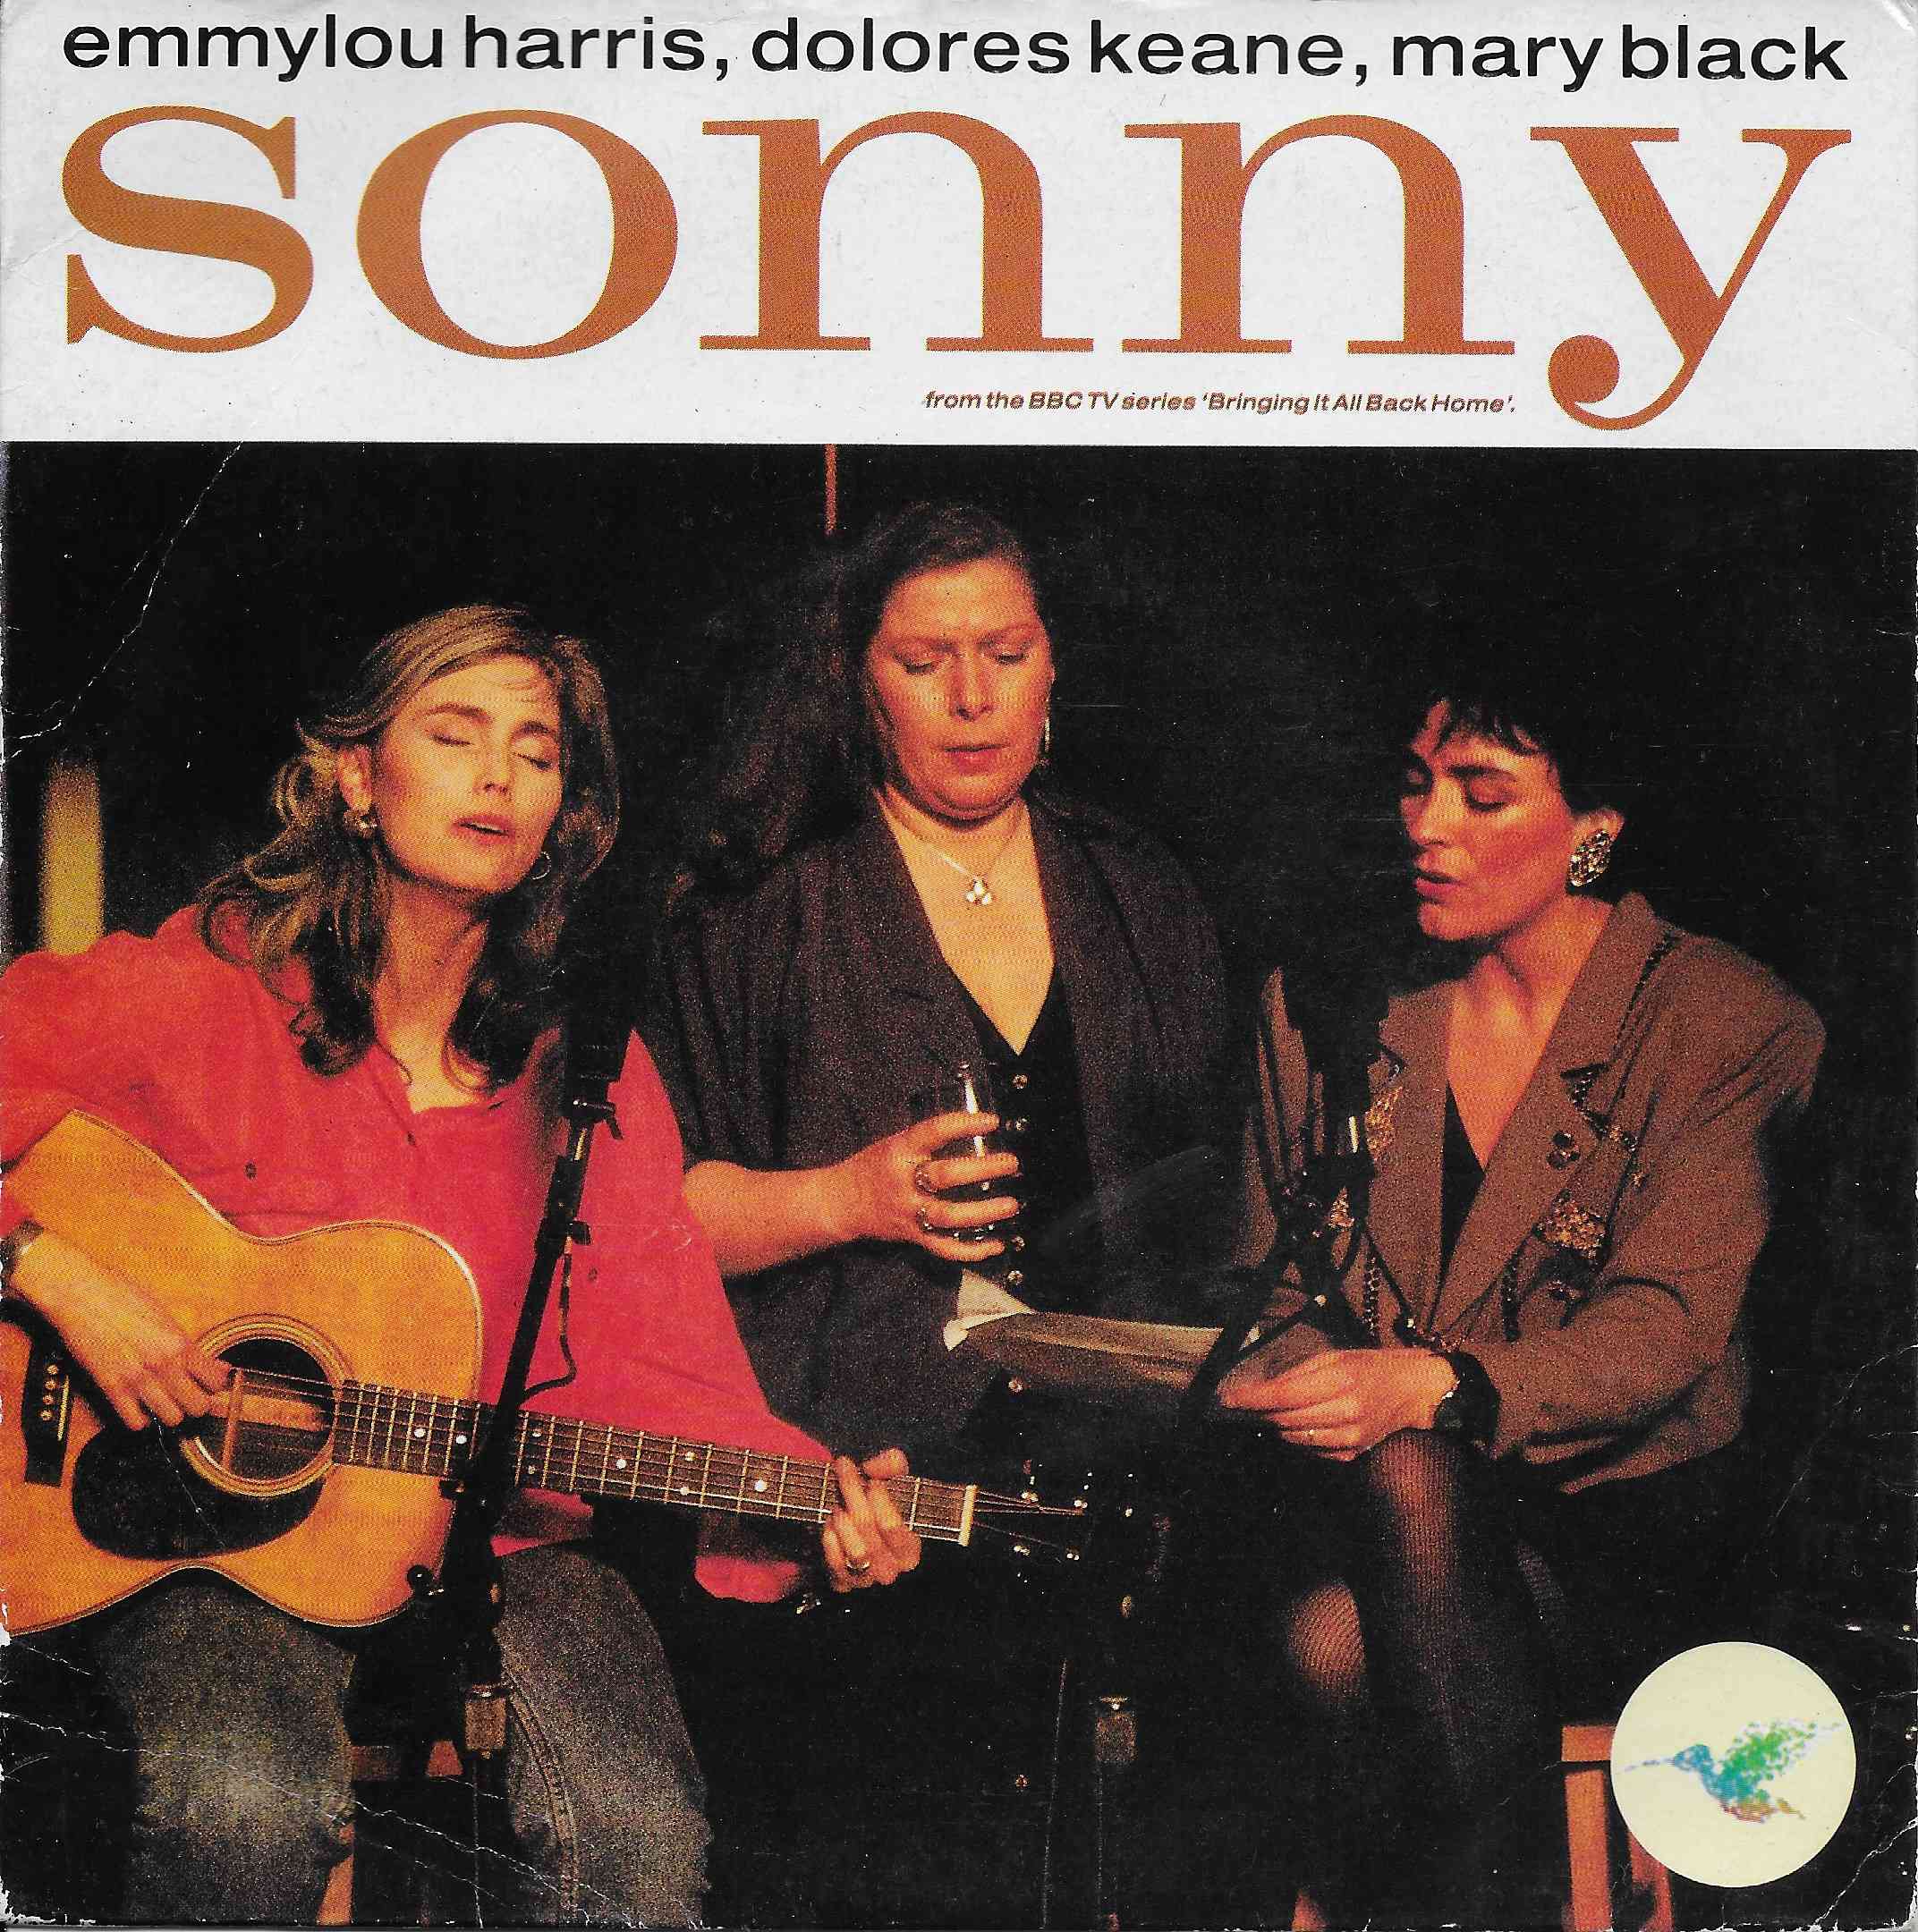 Picture of Sonny by artist R. Hynes / The Voice Squad / Emmylou Harris / Dolores Keane / Mary Black from the BBC singles - Records and Tapes library